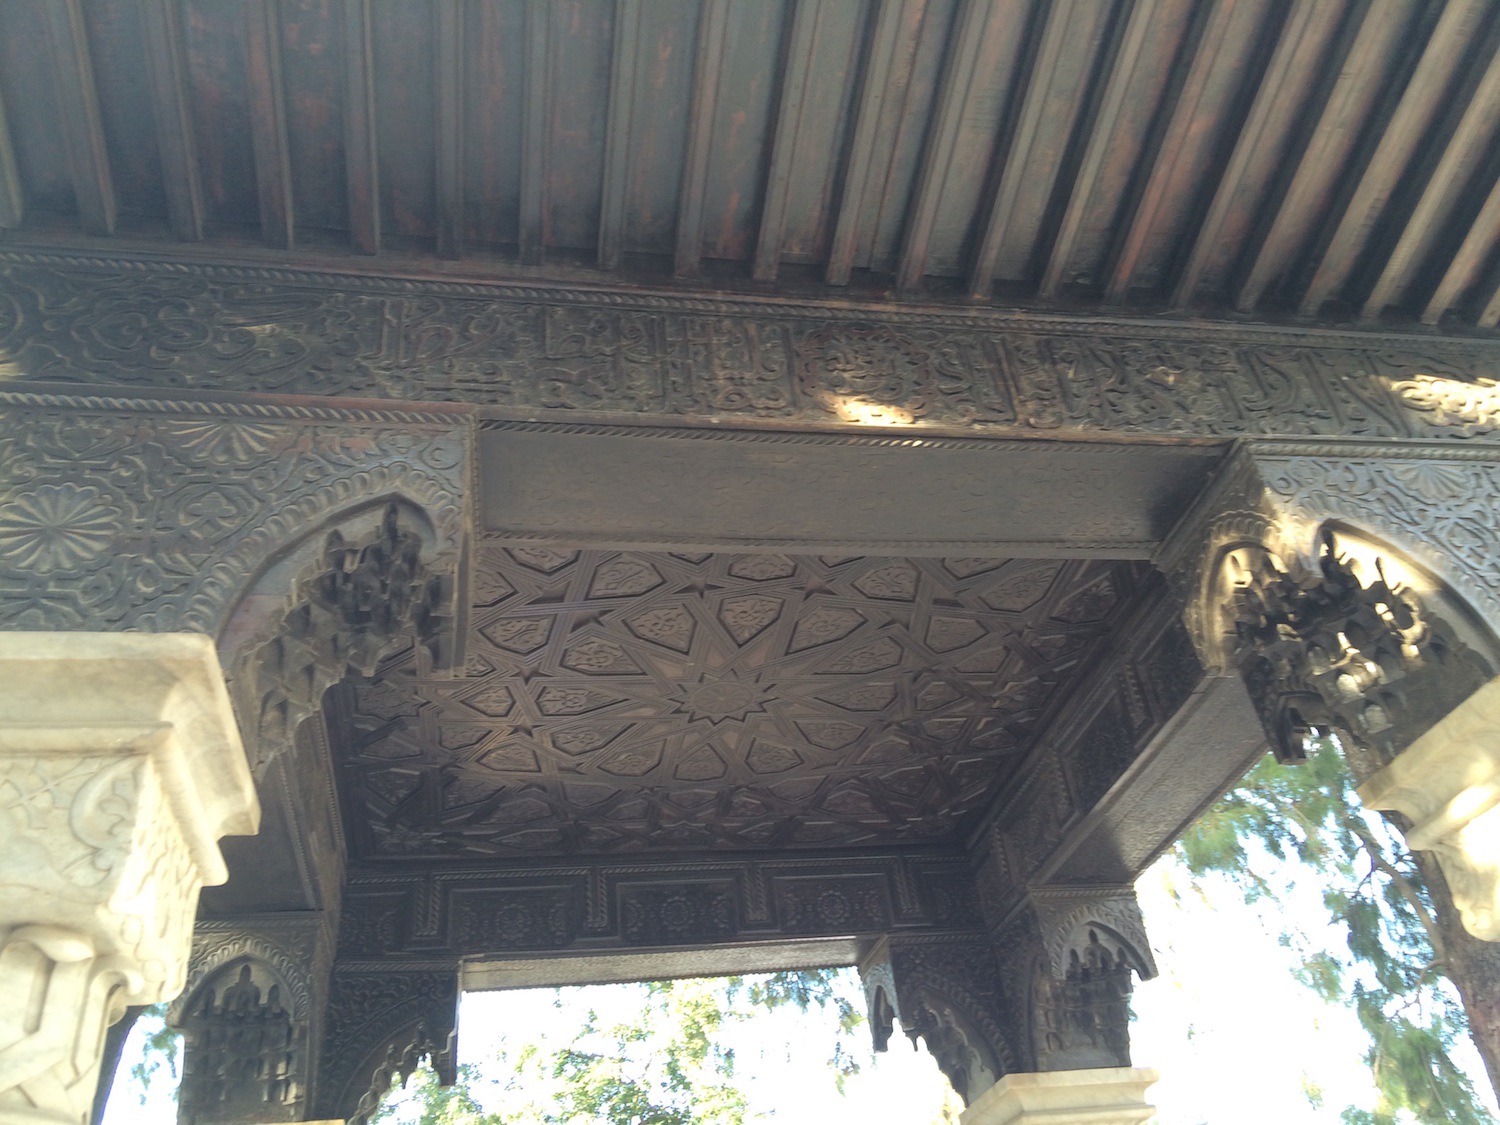 Detail view of the carved wood ceiling of the pavilion